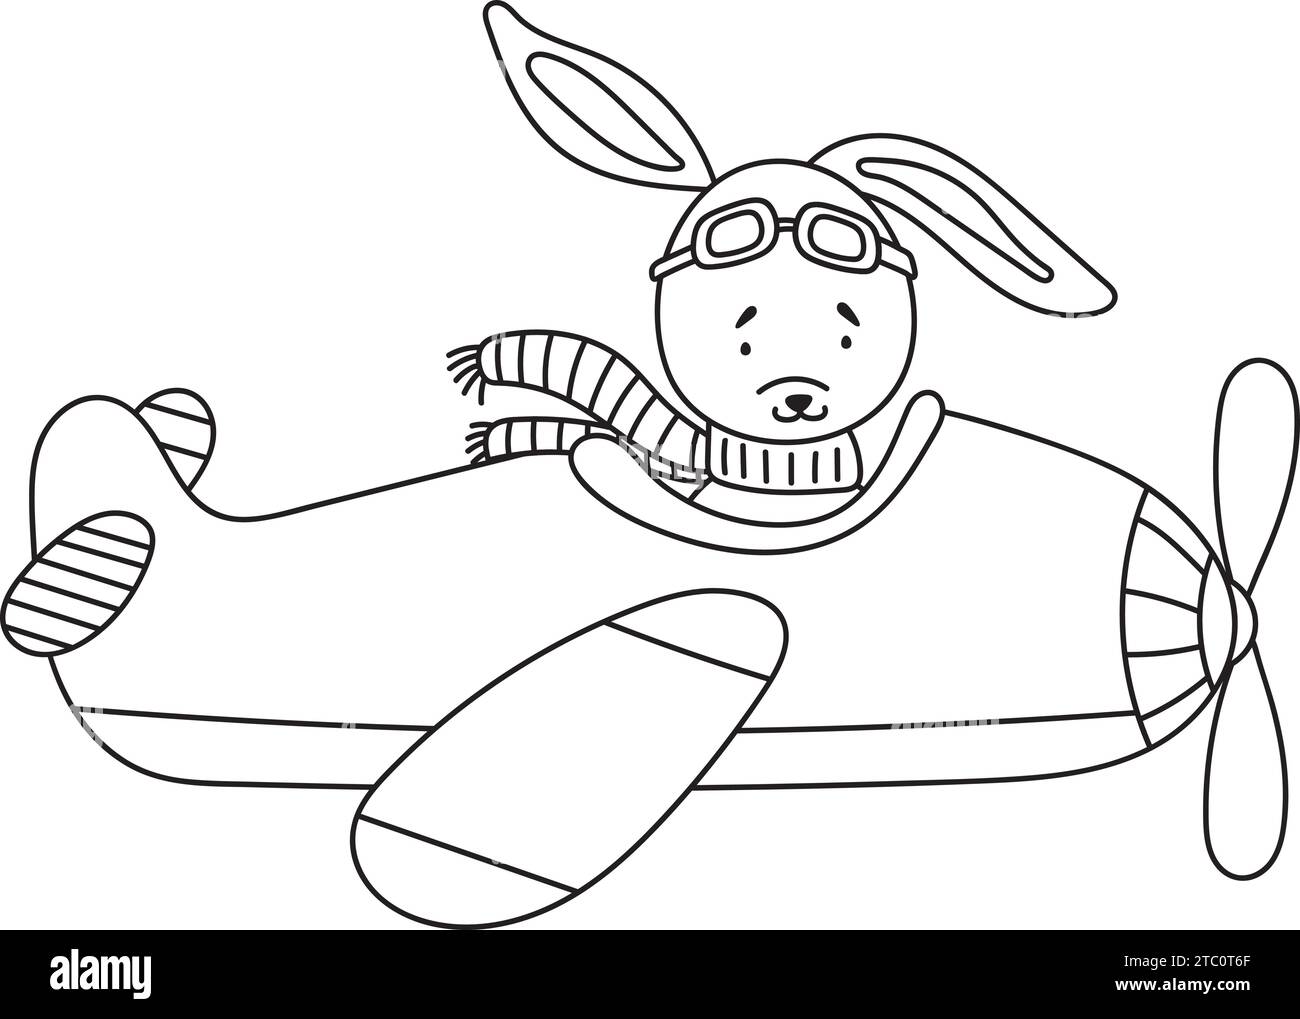 Coloring Page For Kids Featuring A Bunny Pilot Flying An Airplane, Is A Fun, Creative Coloring Book For Children Featuring Vector Illustrations Stock Vector